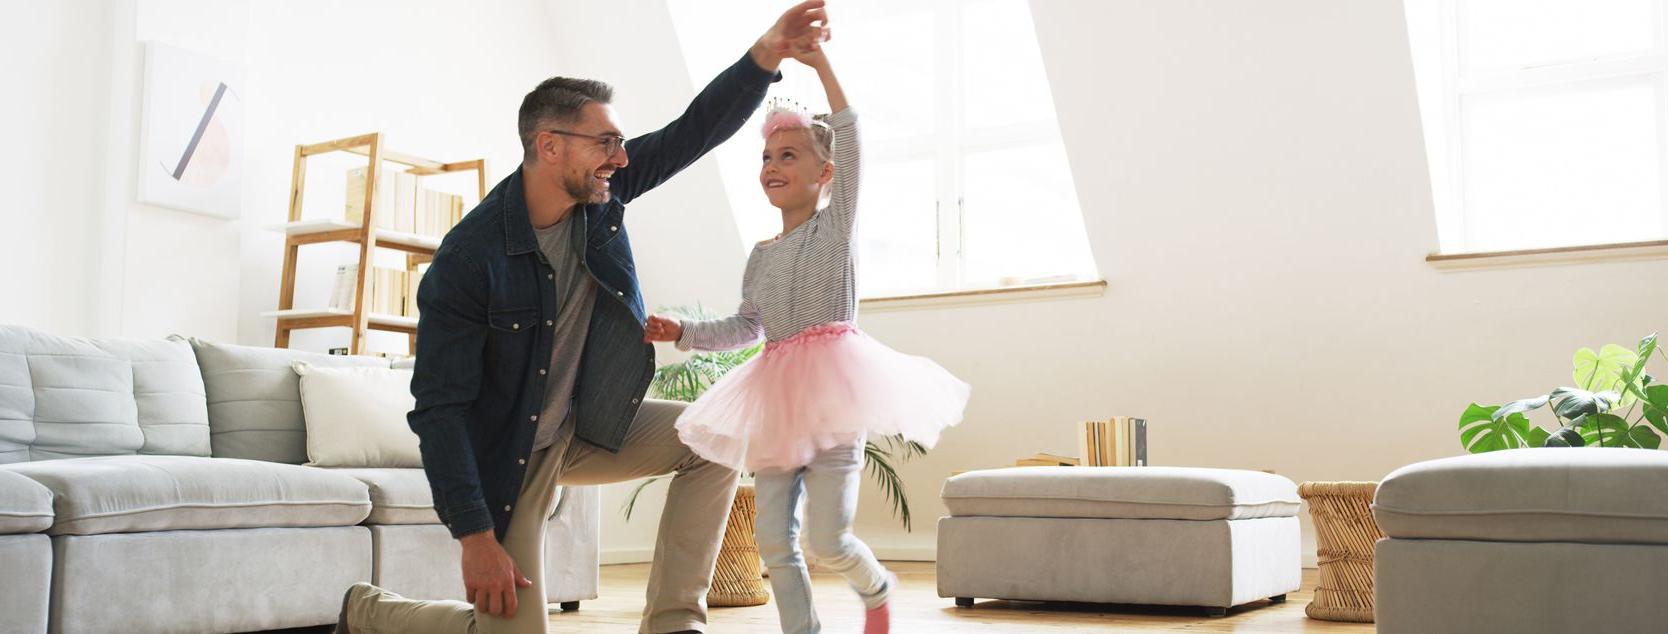 A father twirls his daughter, who is dressed up as a ballerina.